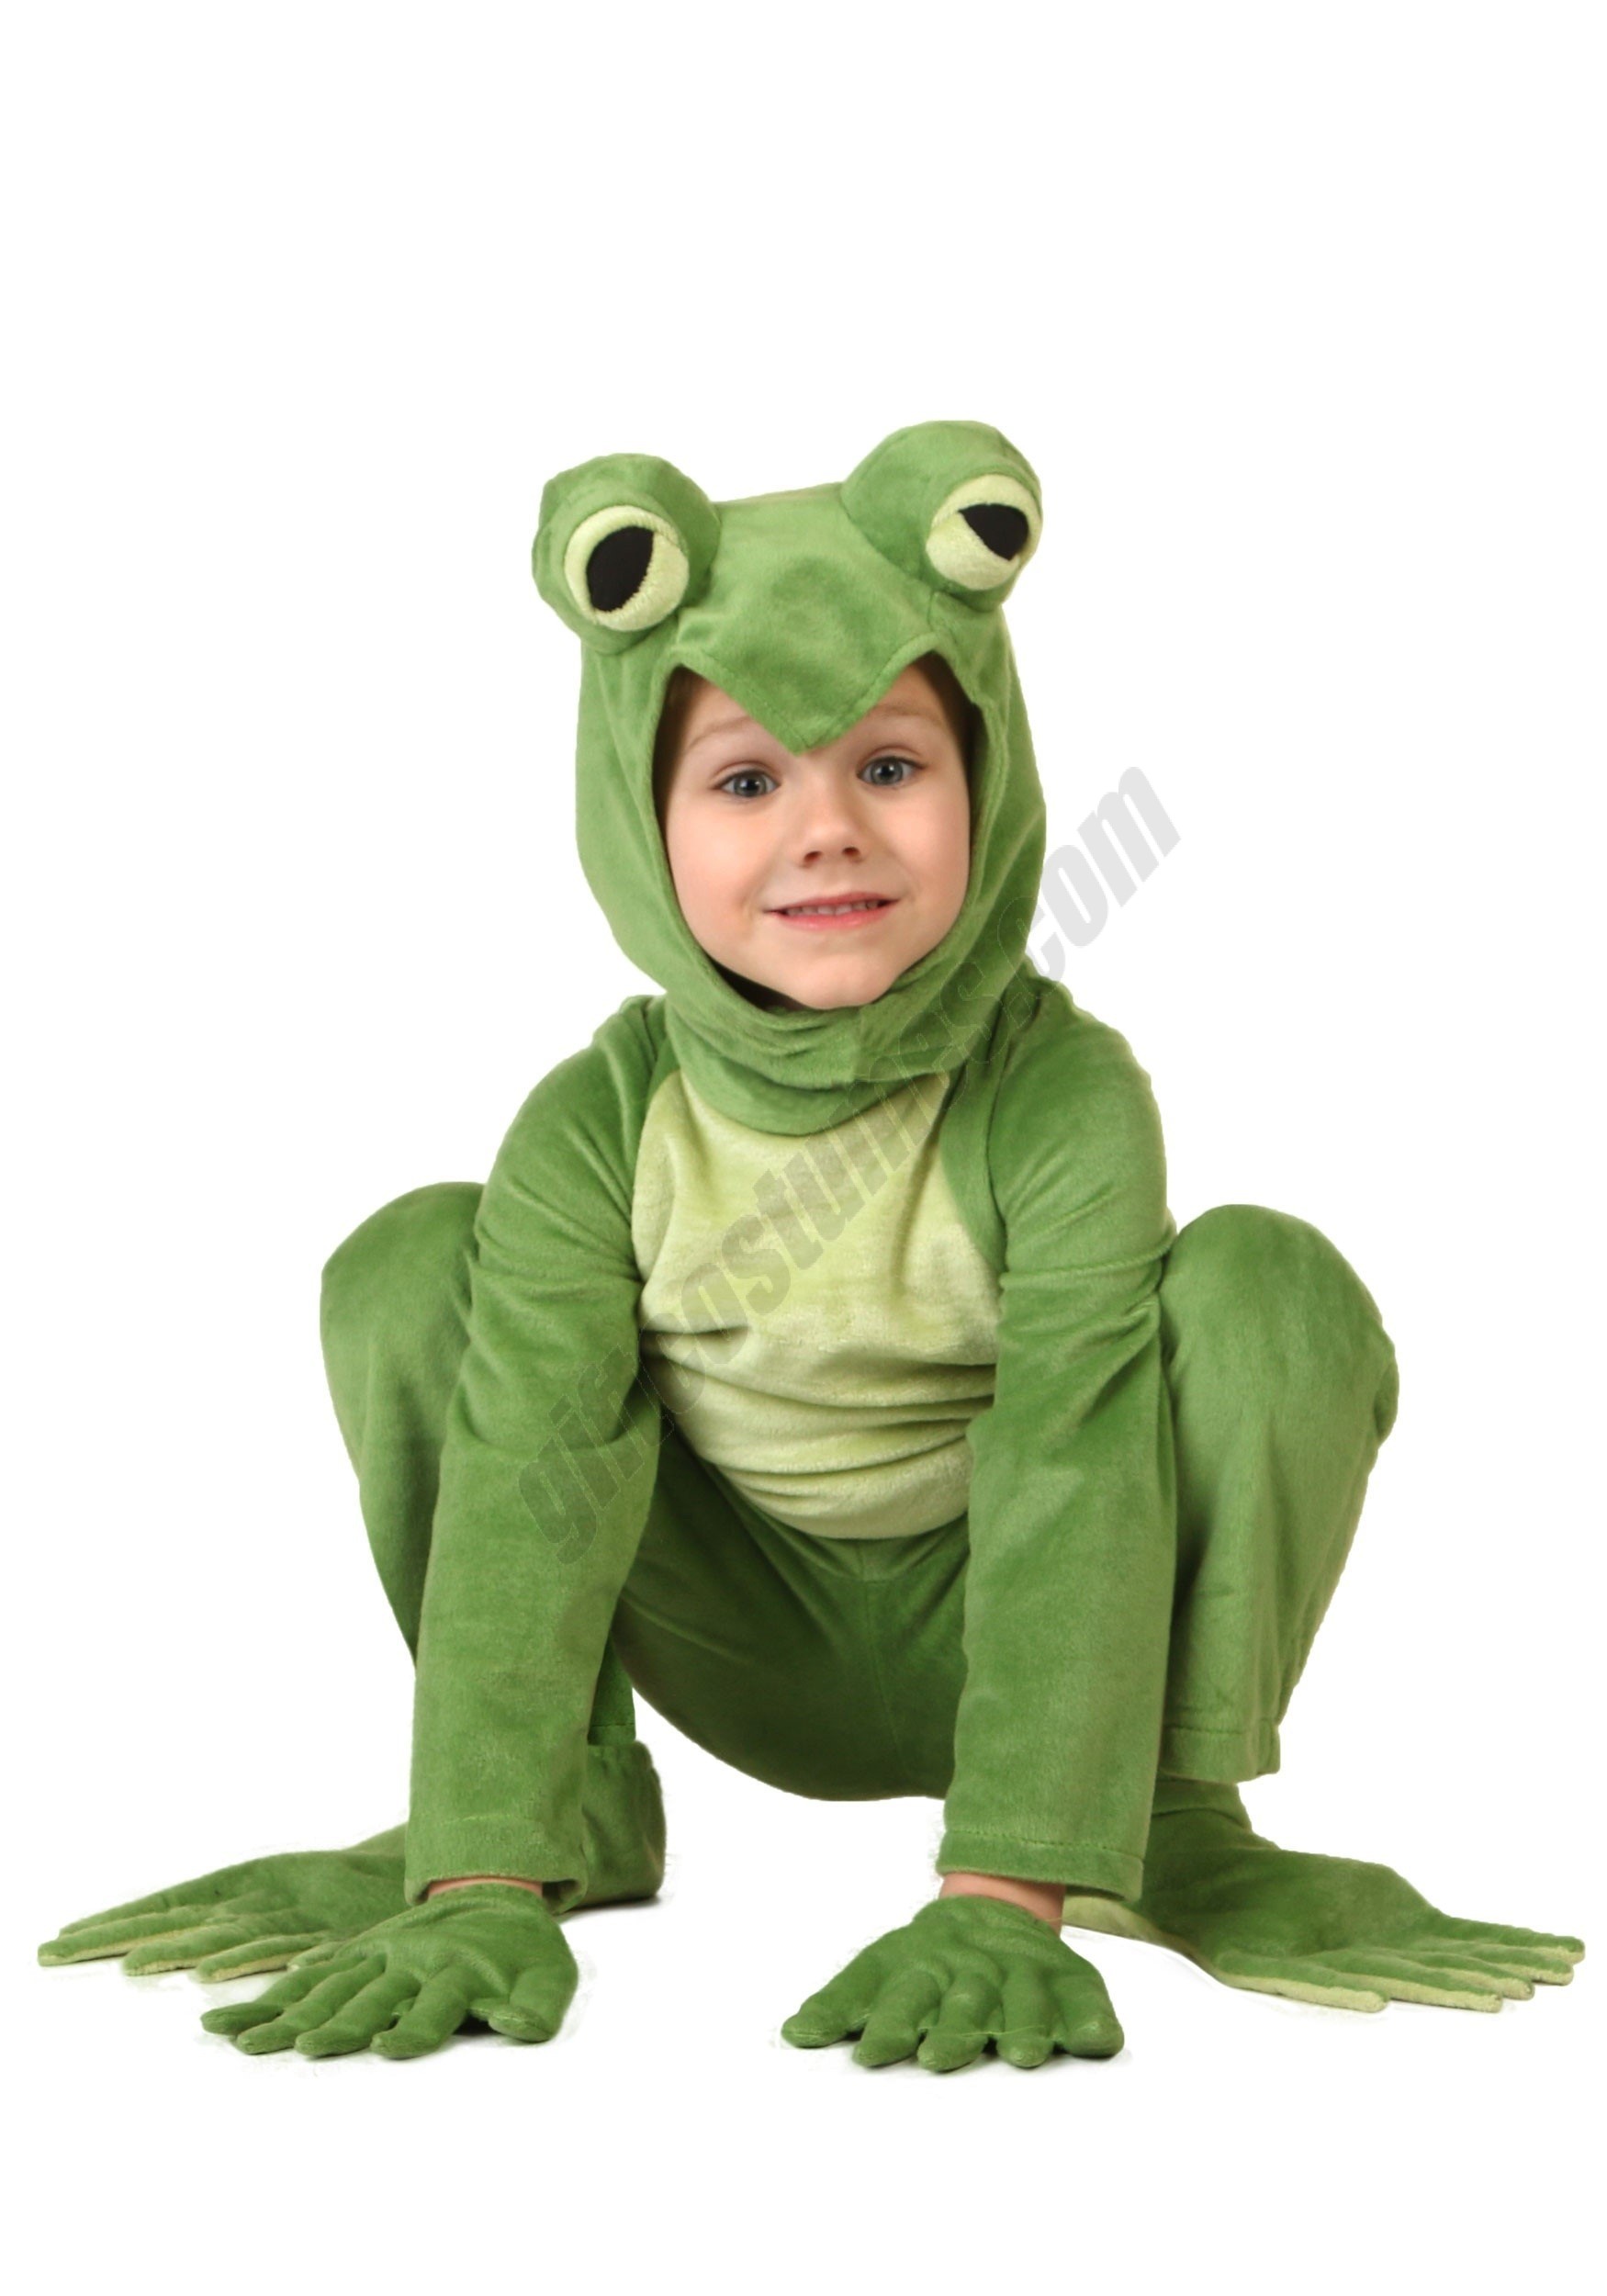 Toddler Deluxe Frog Costume Promotions - Toddler Deluxe Frog Costume Promotions